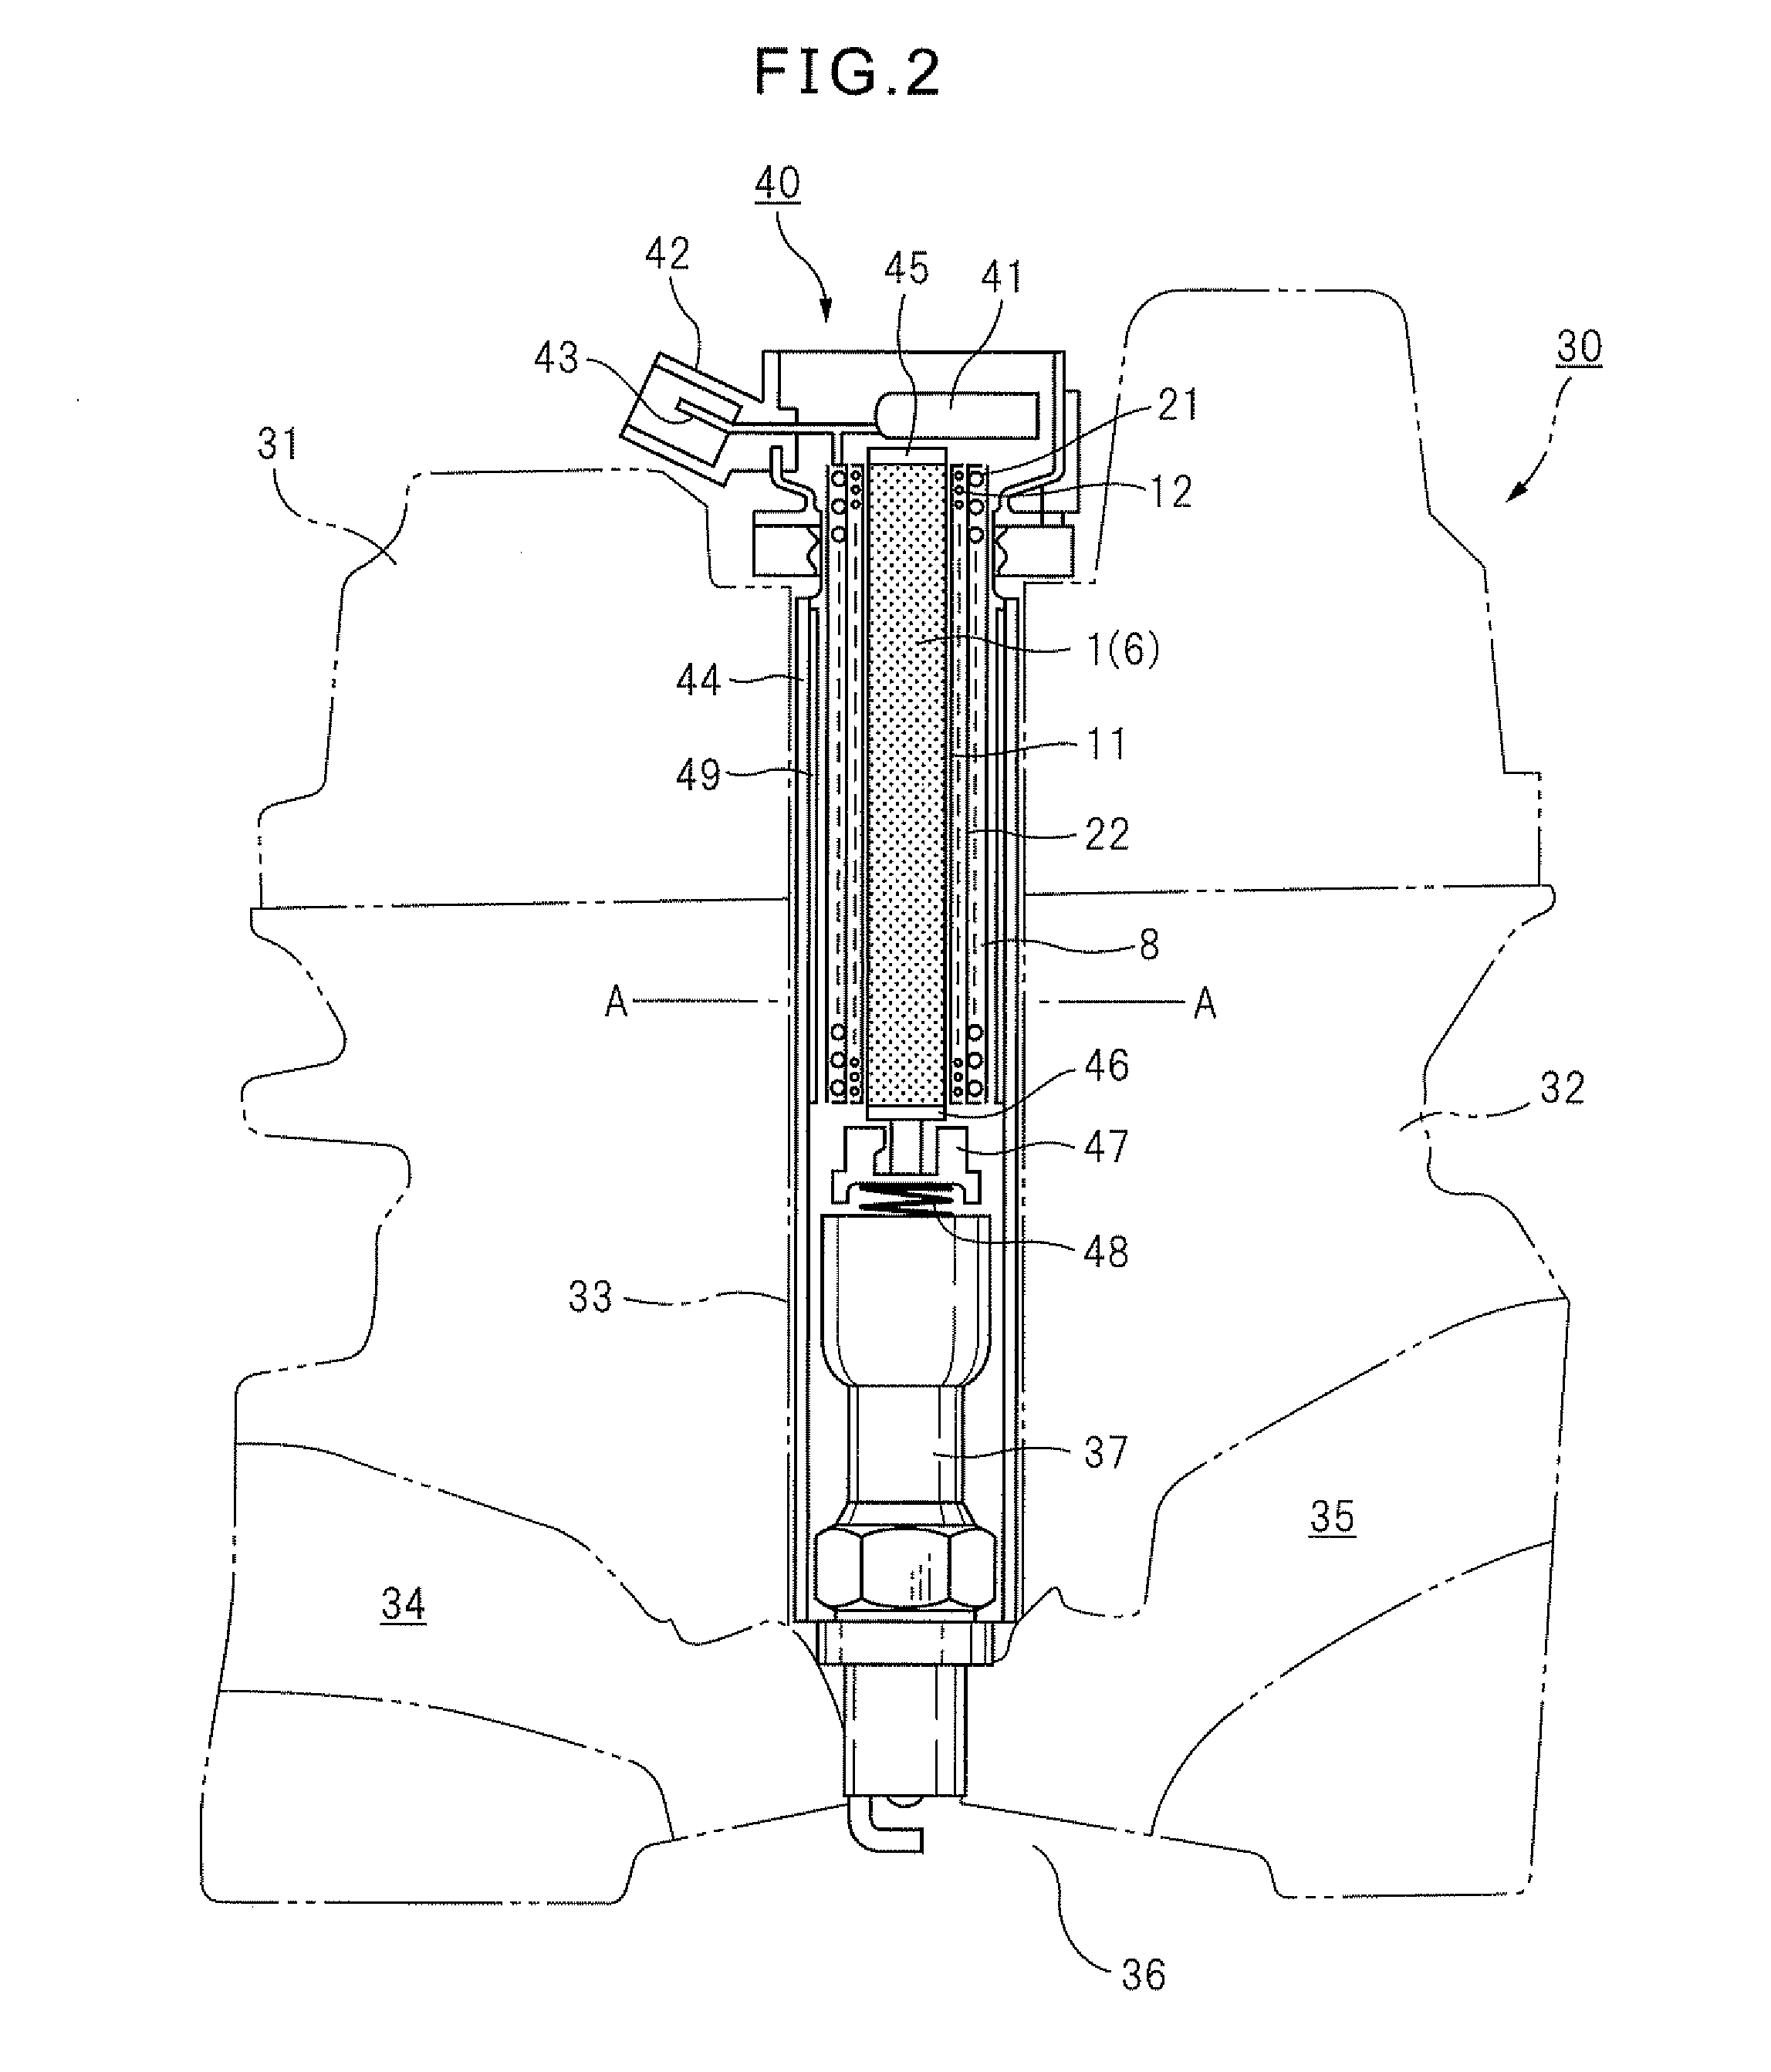 Method of production of ignition coil and ignition coil produced by that method of production